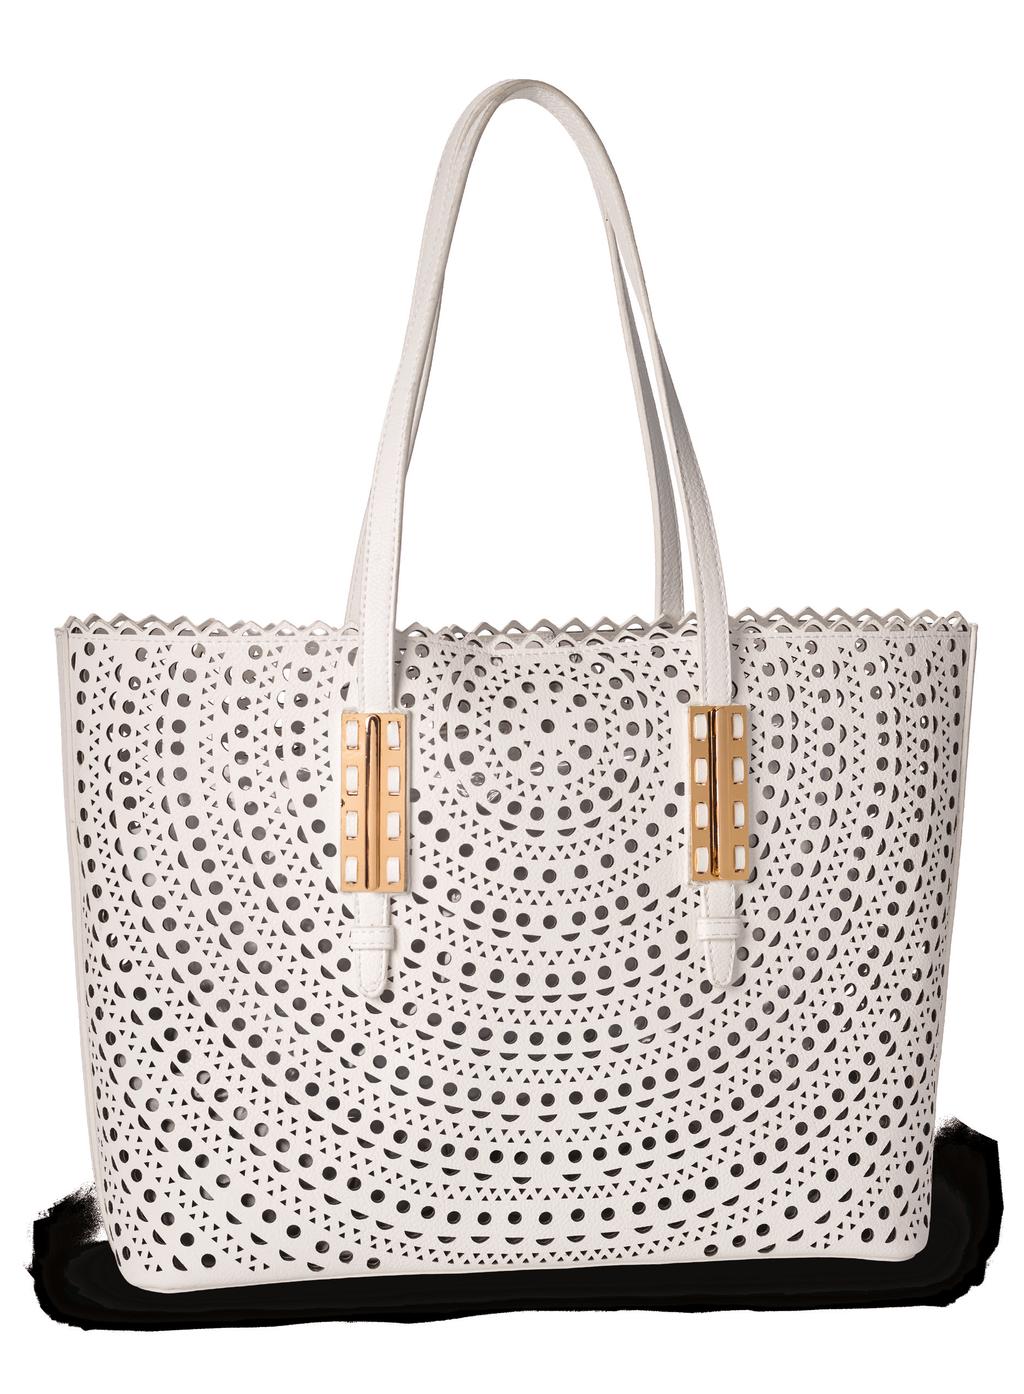 Every woman needs a stylish yet spacious bag in her wardrobe! This is the one!